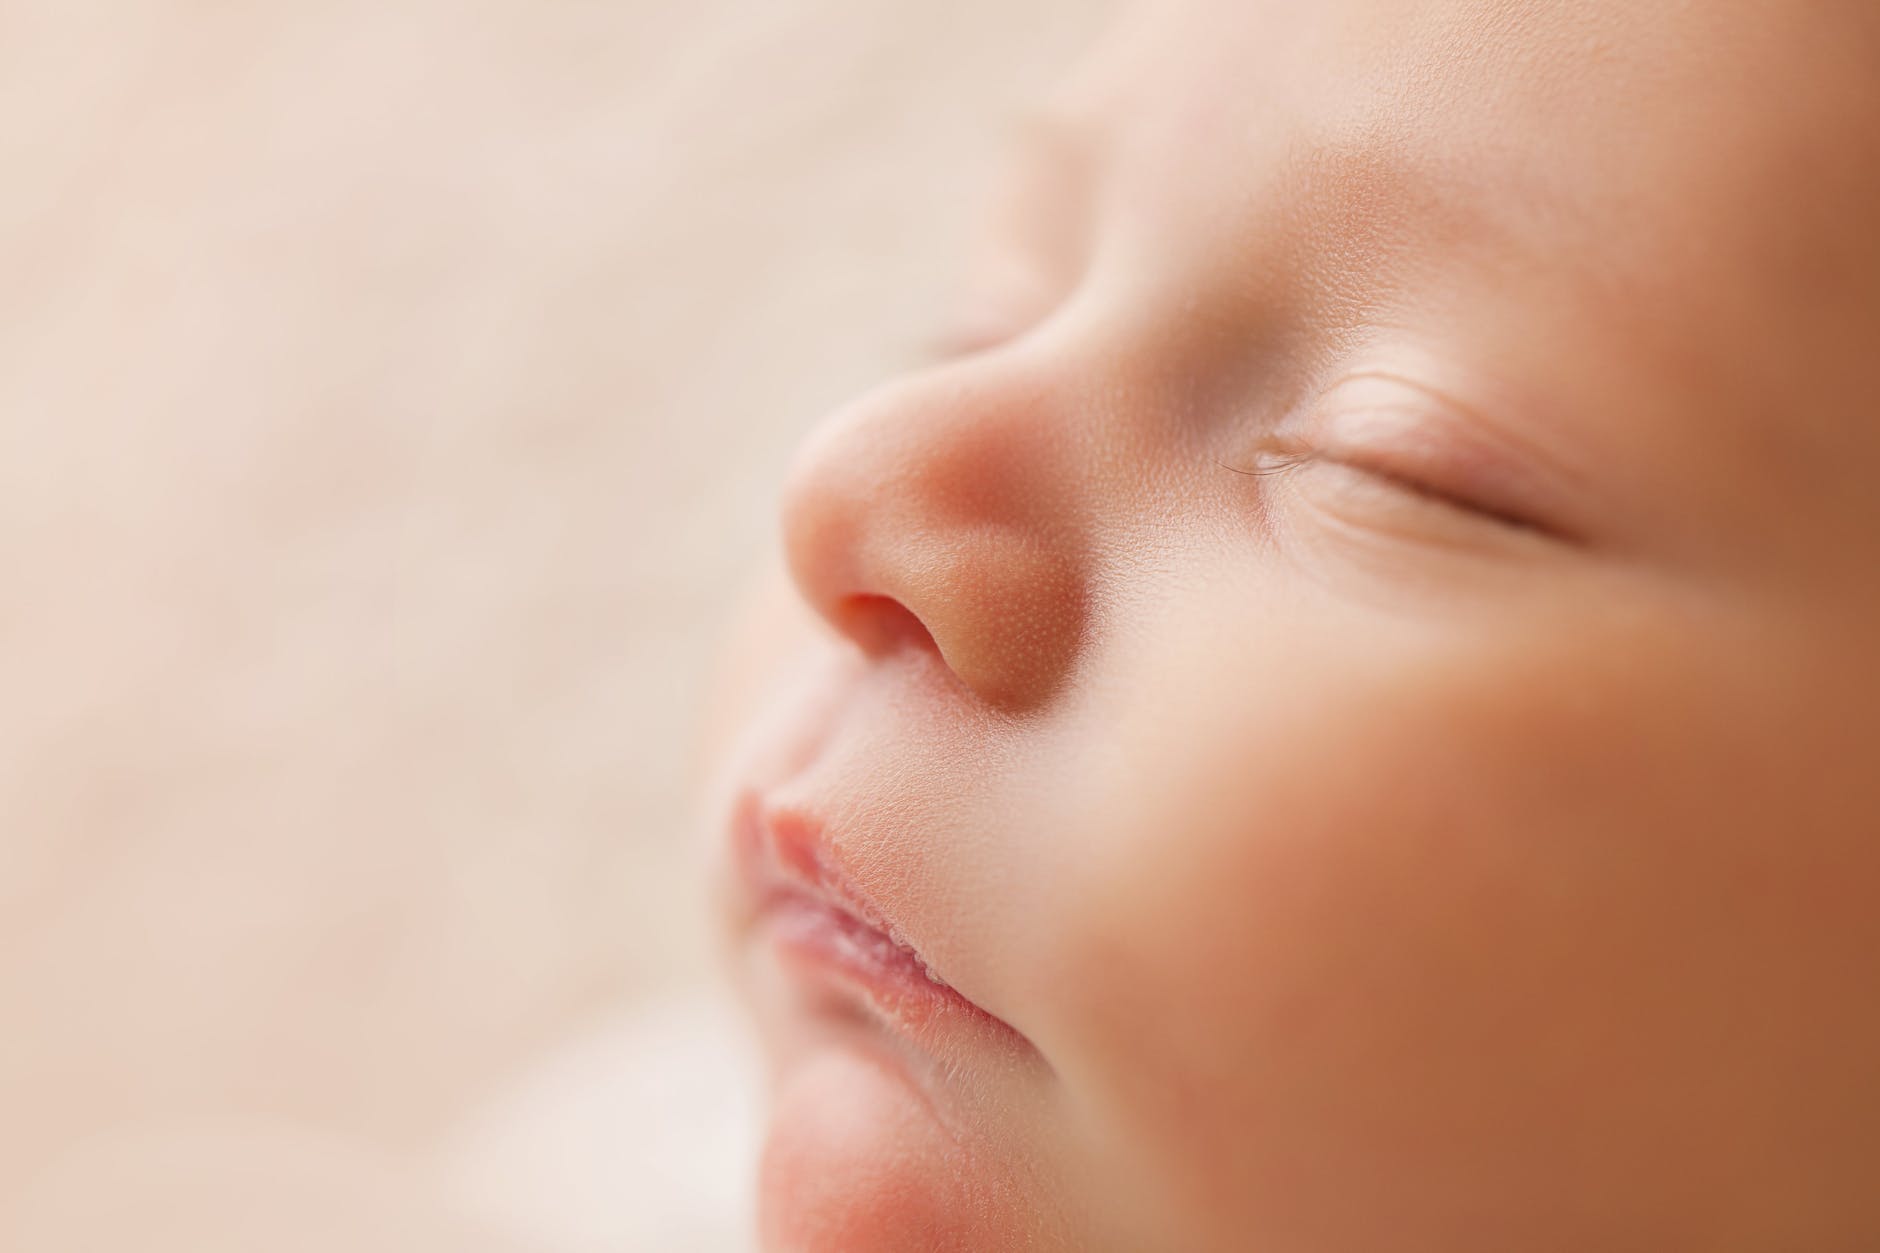 Know signs and treatment of baby jaundice - a common harmless condition in newborns